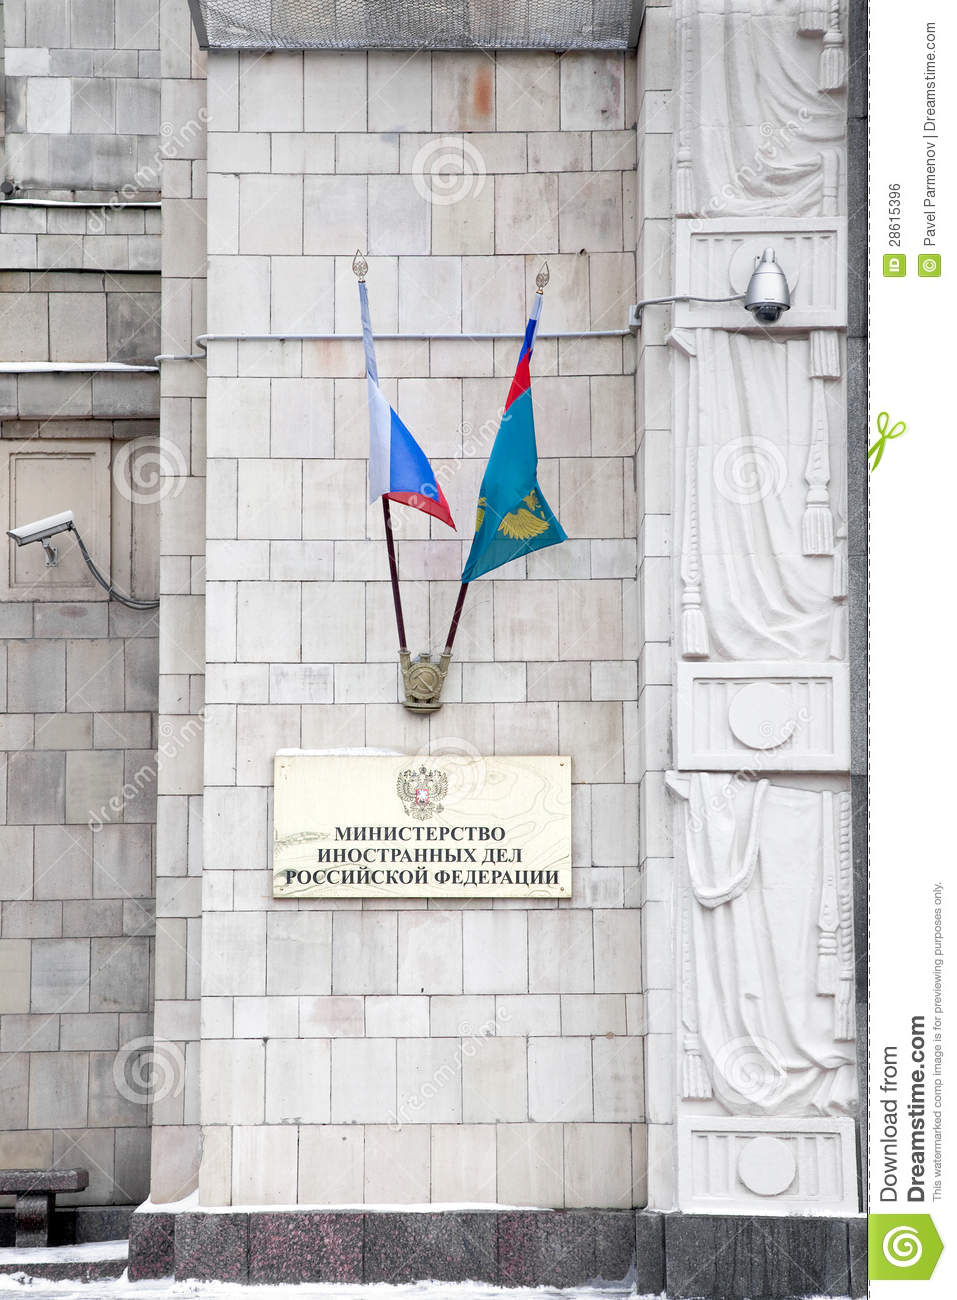 Ministry Of Foreign Affairs Royalty Free Stock Image   Image  28615396